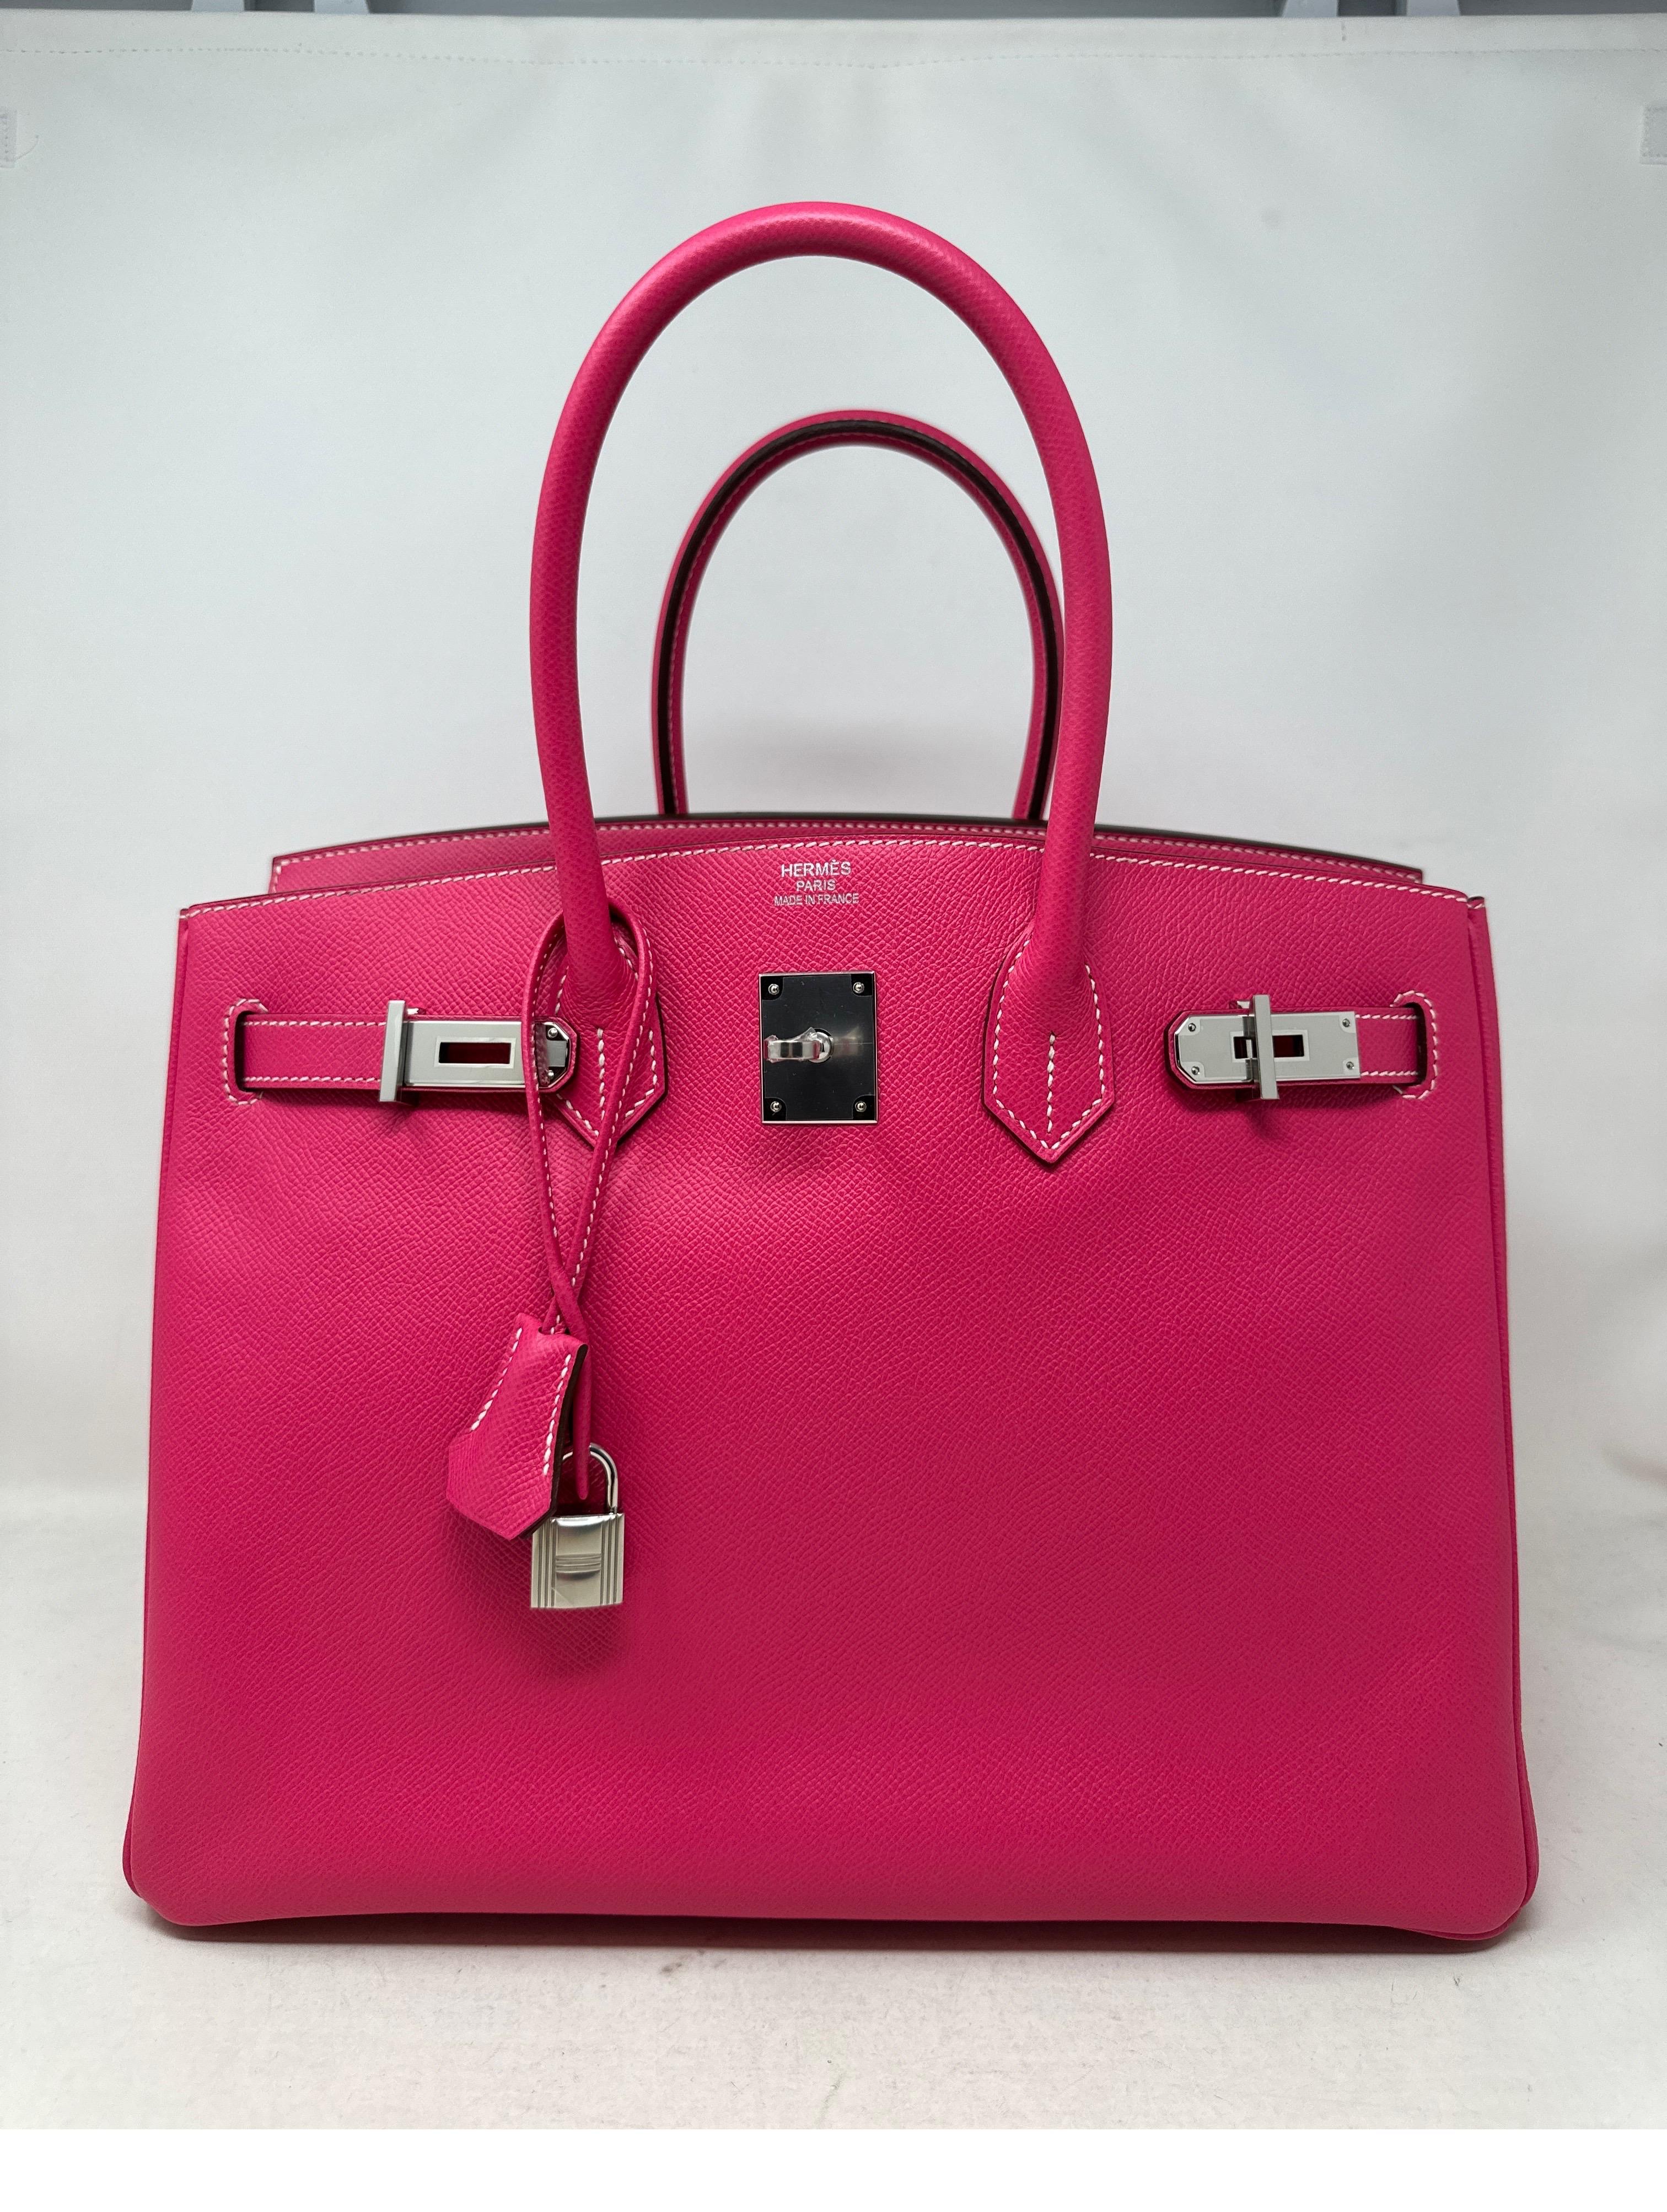 Hermes Rose Tyrien Birkin 35 Bag. Excellent condition. Palladium silver hardware. Excellent condition. Looks like new. Plastic is still on hardware. Interior clean. Includes clochette, lock, keys, and dust bag. Full set. Guaranteed authentic. 